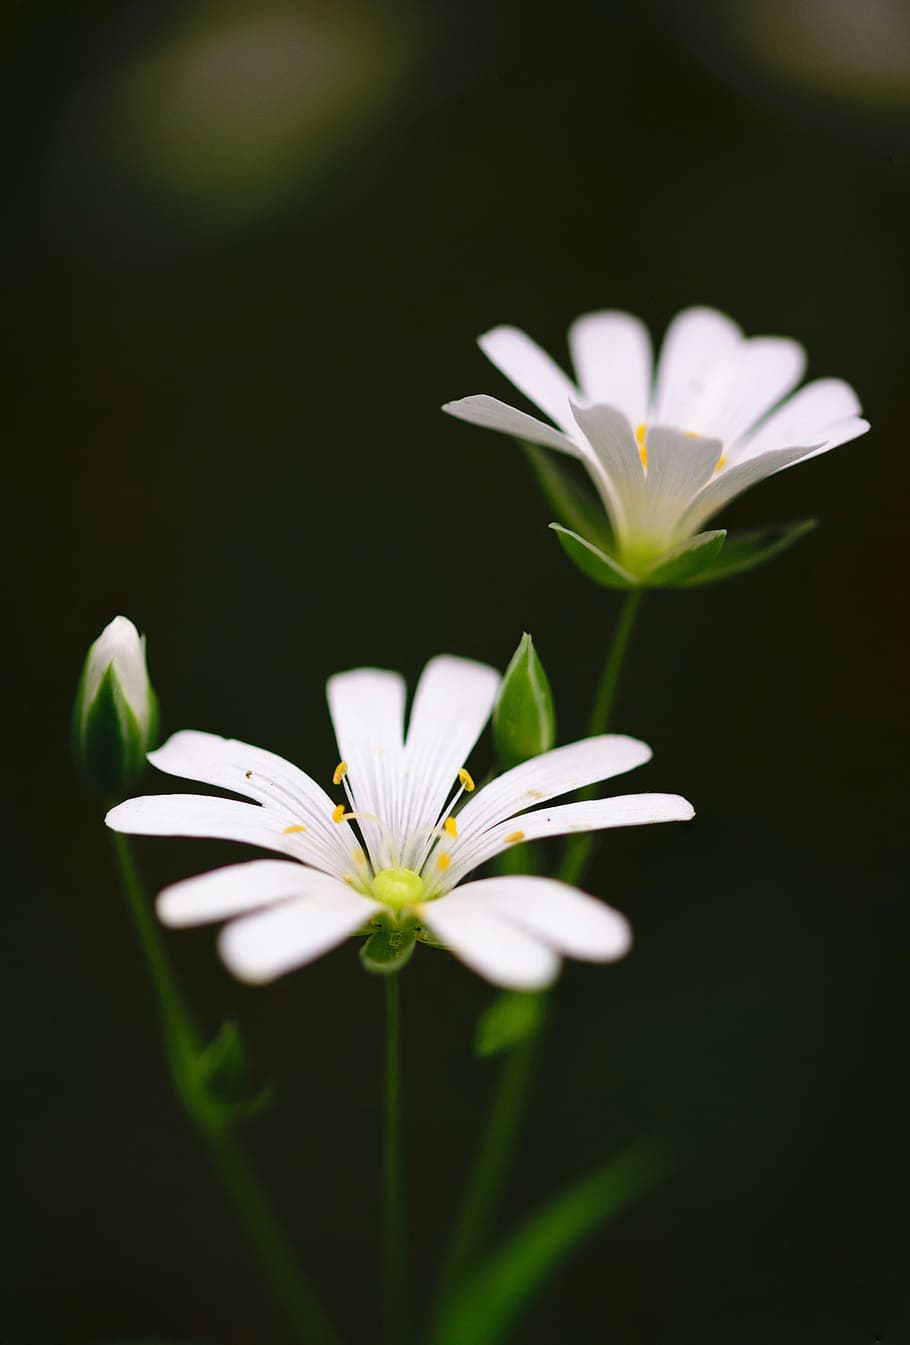 close-up selective focus photo of white petaled flowers, Abstract